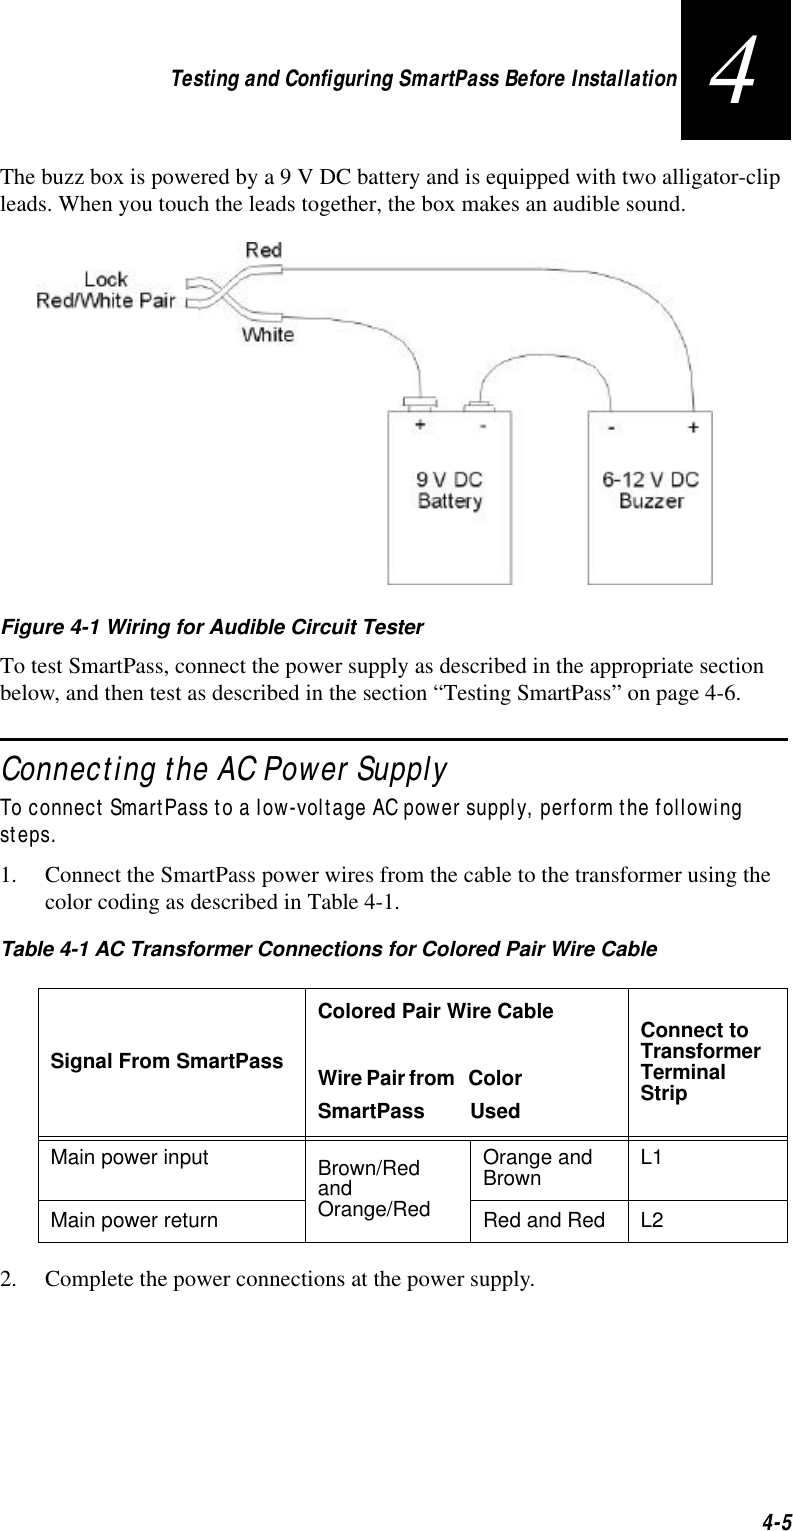 Testing and Configuring SmartPass Before Installation4-54The buzz box is powered by a 9 V DC battery and is equipped with two alligator-clip leads. When you touch the leads together, the box makes an audible sound. Figure 4-1 Wiring for Audible Circuit TesterTo test SmartPass, connect the power supply as described in the appropriate section below, and then test as described in the section “Testing SmartPass” on page 4-6.Connecting the AC Power SupplyTo connect SmartPass to a low-voltage AC power supply, perform the following steps. 1. Connect the SmartPass power wires from the cable to the transformer using the color coding as described in Table 4-1.2. Complete the power connections at the power supply.Table 4-1 AC Transformer Connections for Colored Pair Wire CableSignal From SmartPassColored Pair Wire CableWire Pair from  Color SmartPass  UsedConnect to Transformer Terminal StripMain power input Brown/Red and Orange/RedOrange and Brown L1Main power return Red and Red L2